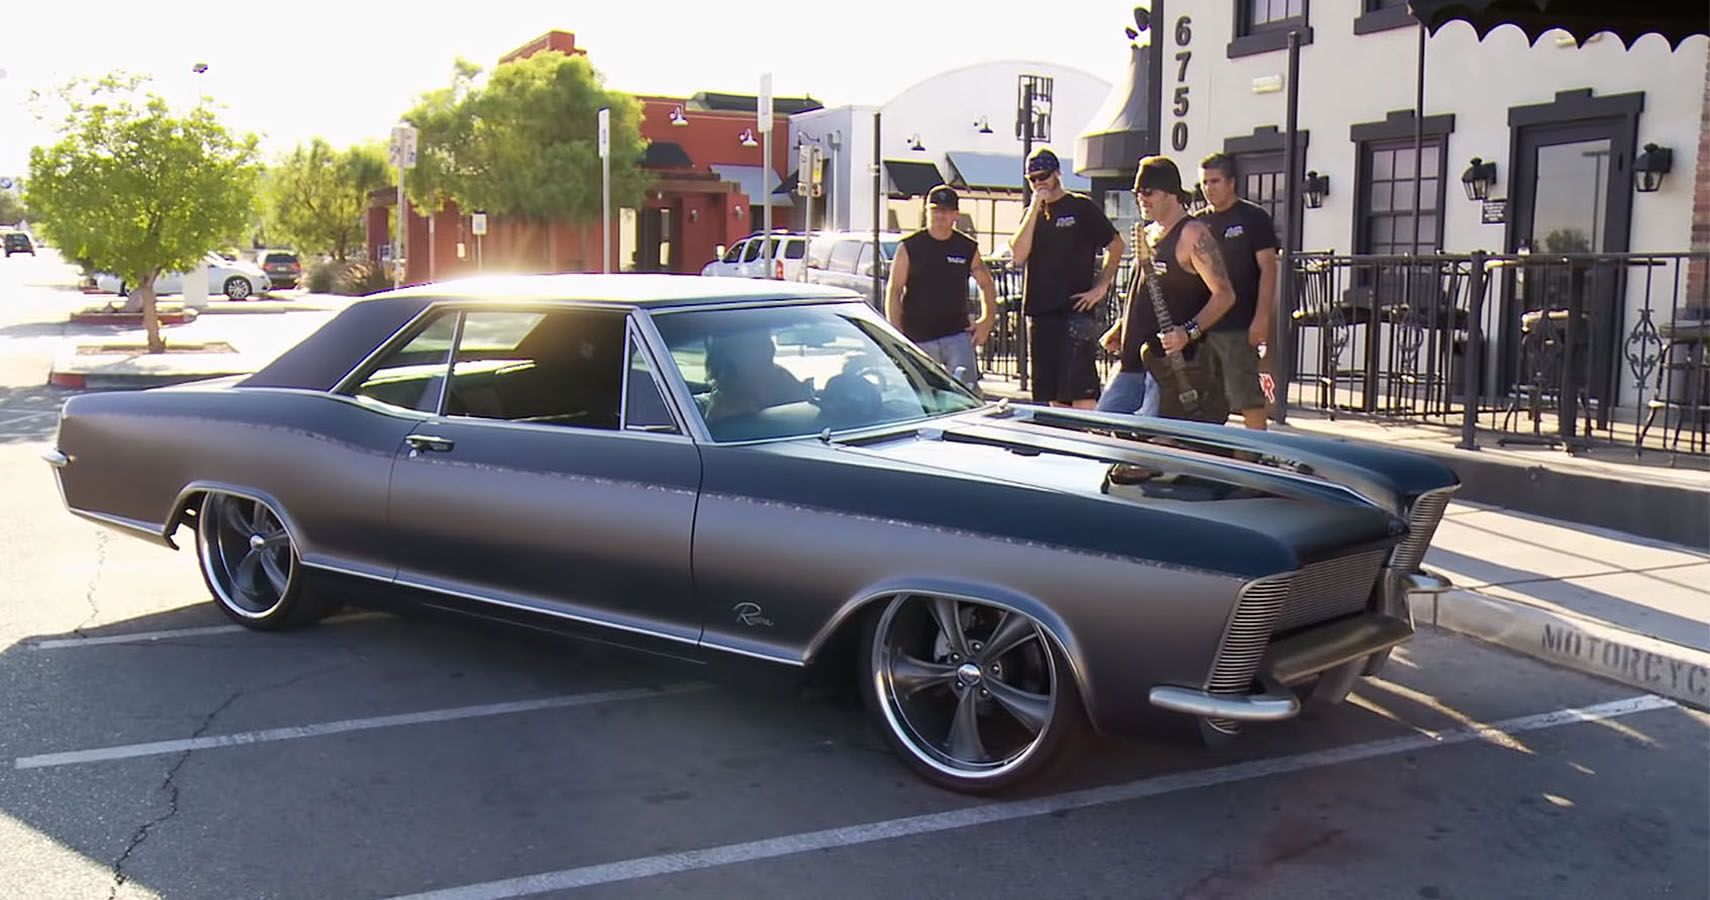 10 Coolest Cars Modified By The Cast Of Counting Cars (And How They Turned Out)